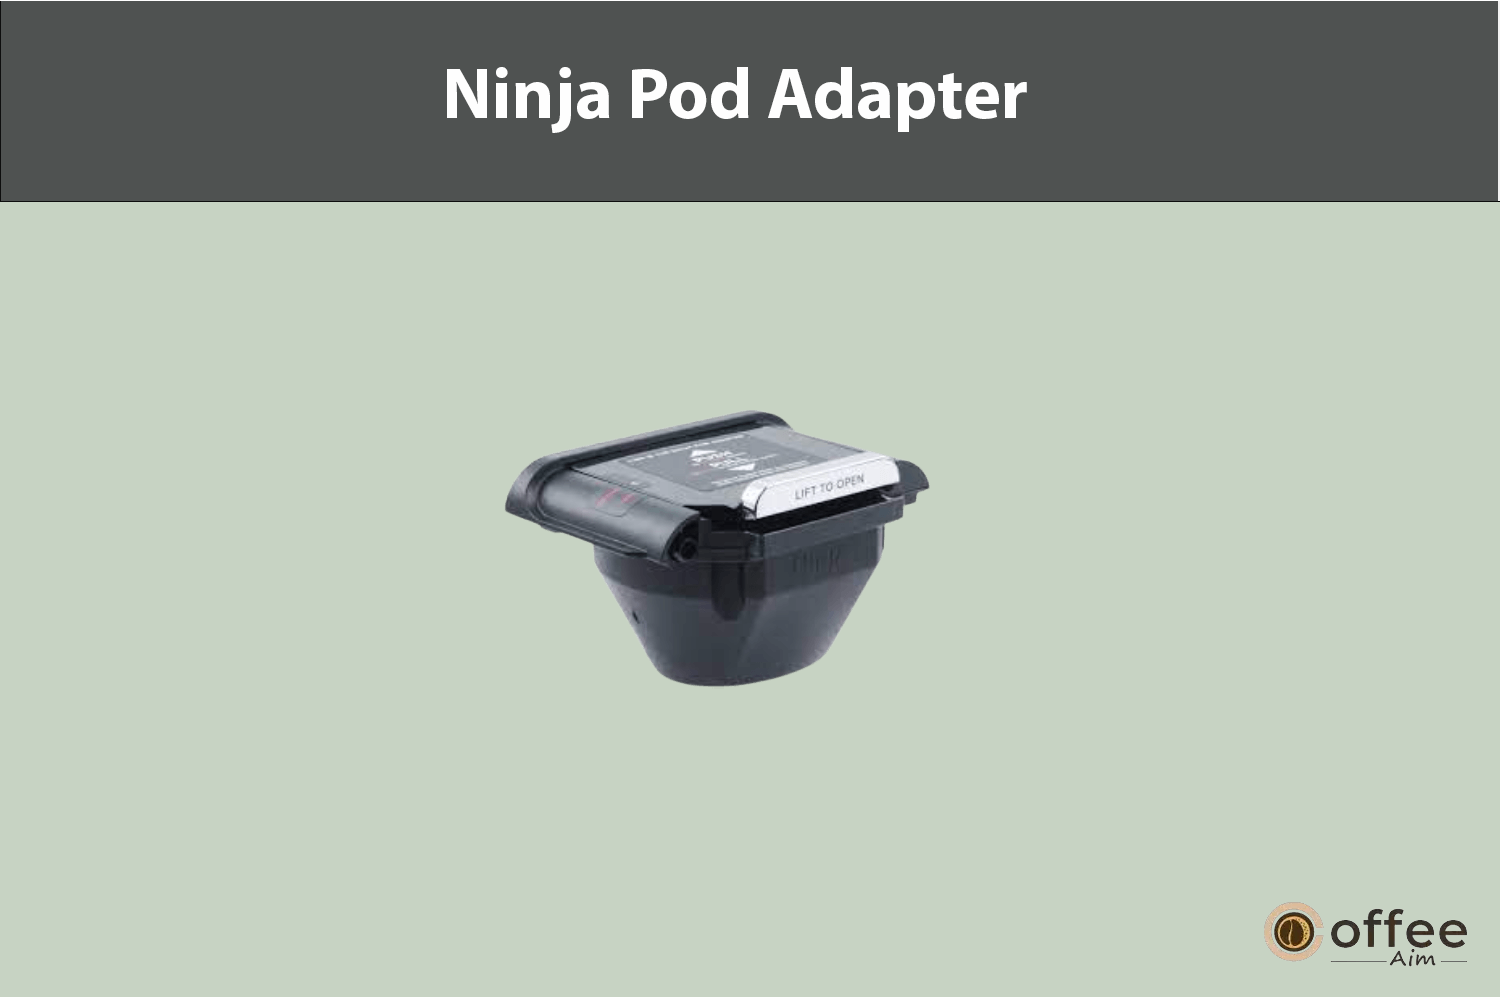 This image illustrates the Ninja Pod Adapter, a key component of the Ninja DualBrew Pro Specialty Coffee System, as featured in the article "How to Use the Ninja DualBrew Pro Specialty Coffee System: Compatible with K-Cup Pods and 12-Cup Drip Coffee Brewing?."